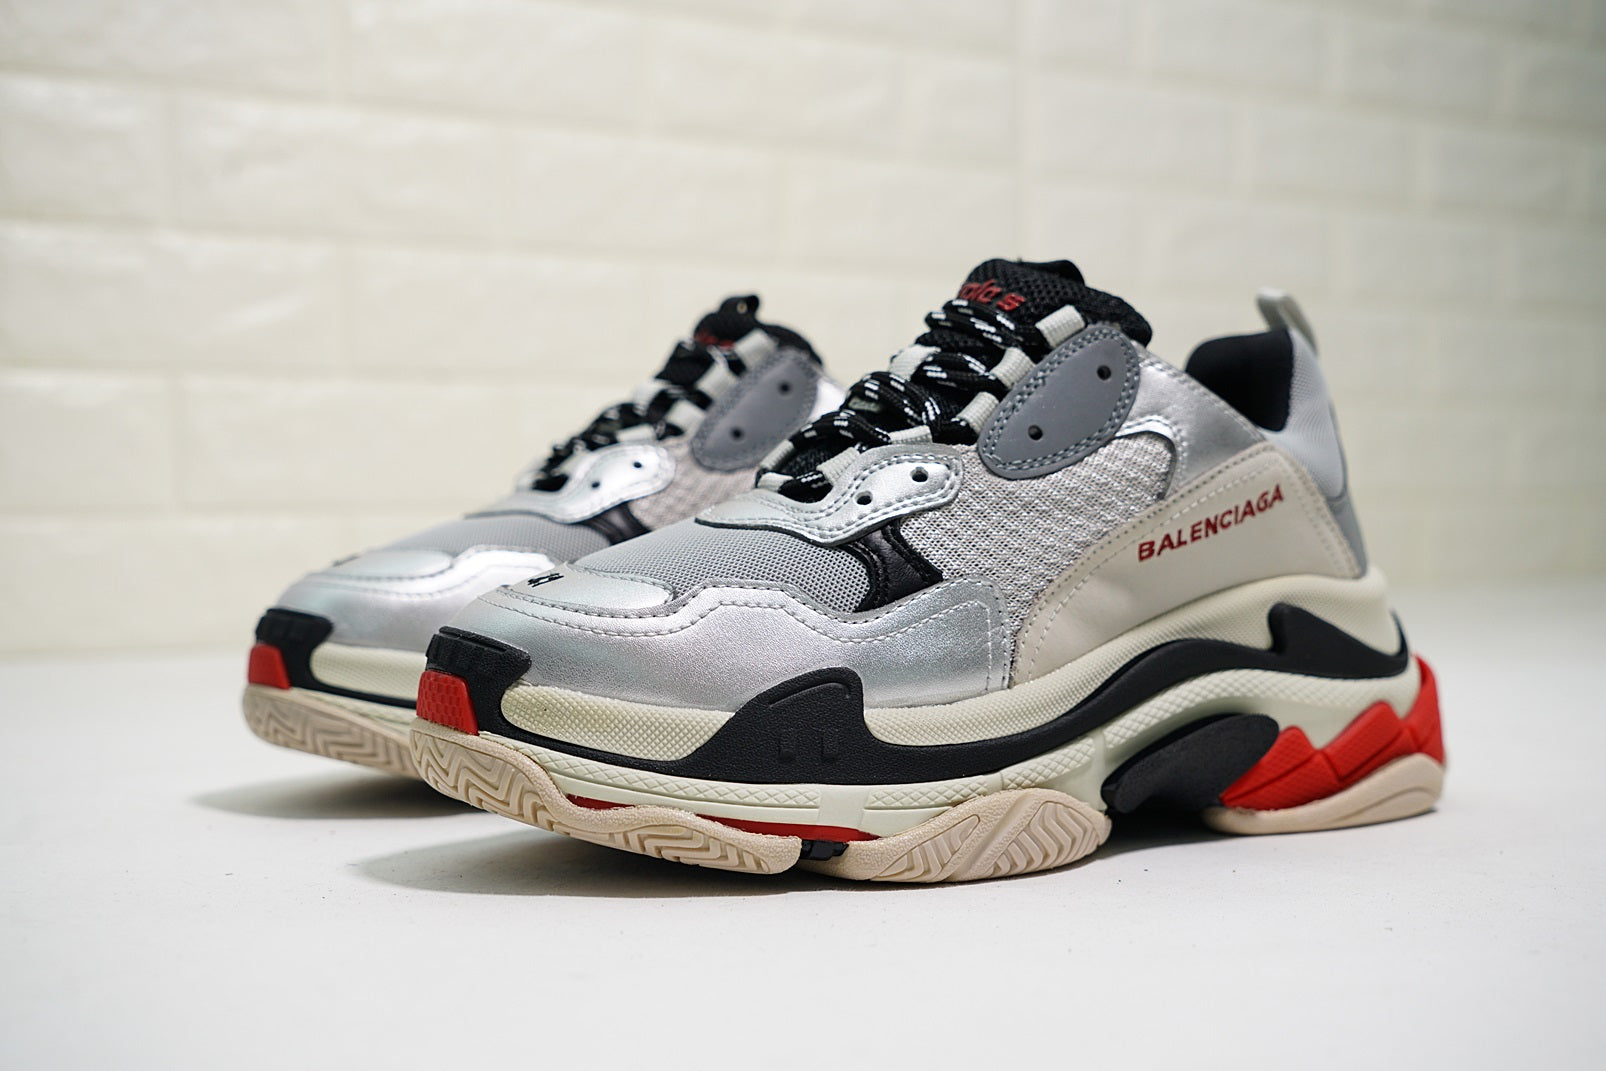 Triple s silver red solid sole - whatever on 